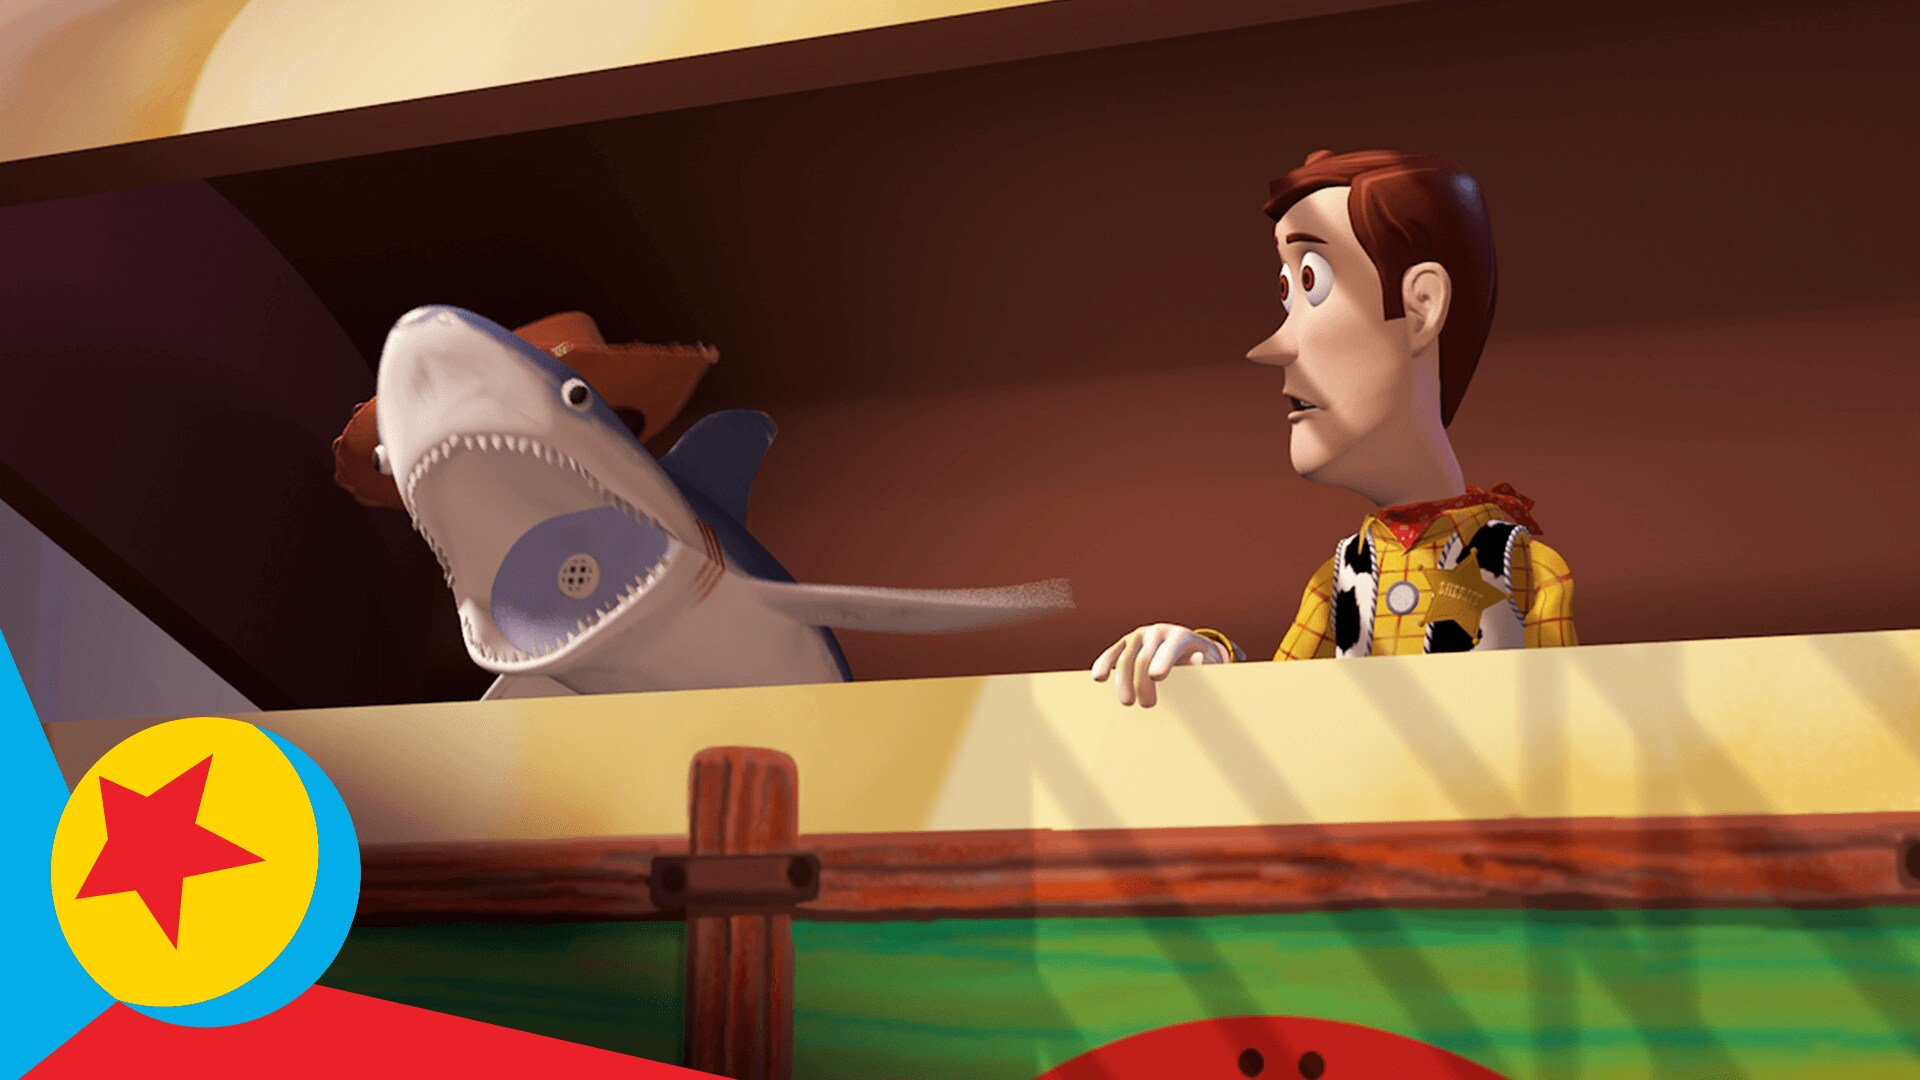 "I'm Woody" Clip from Toy Story | Pixar